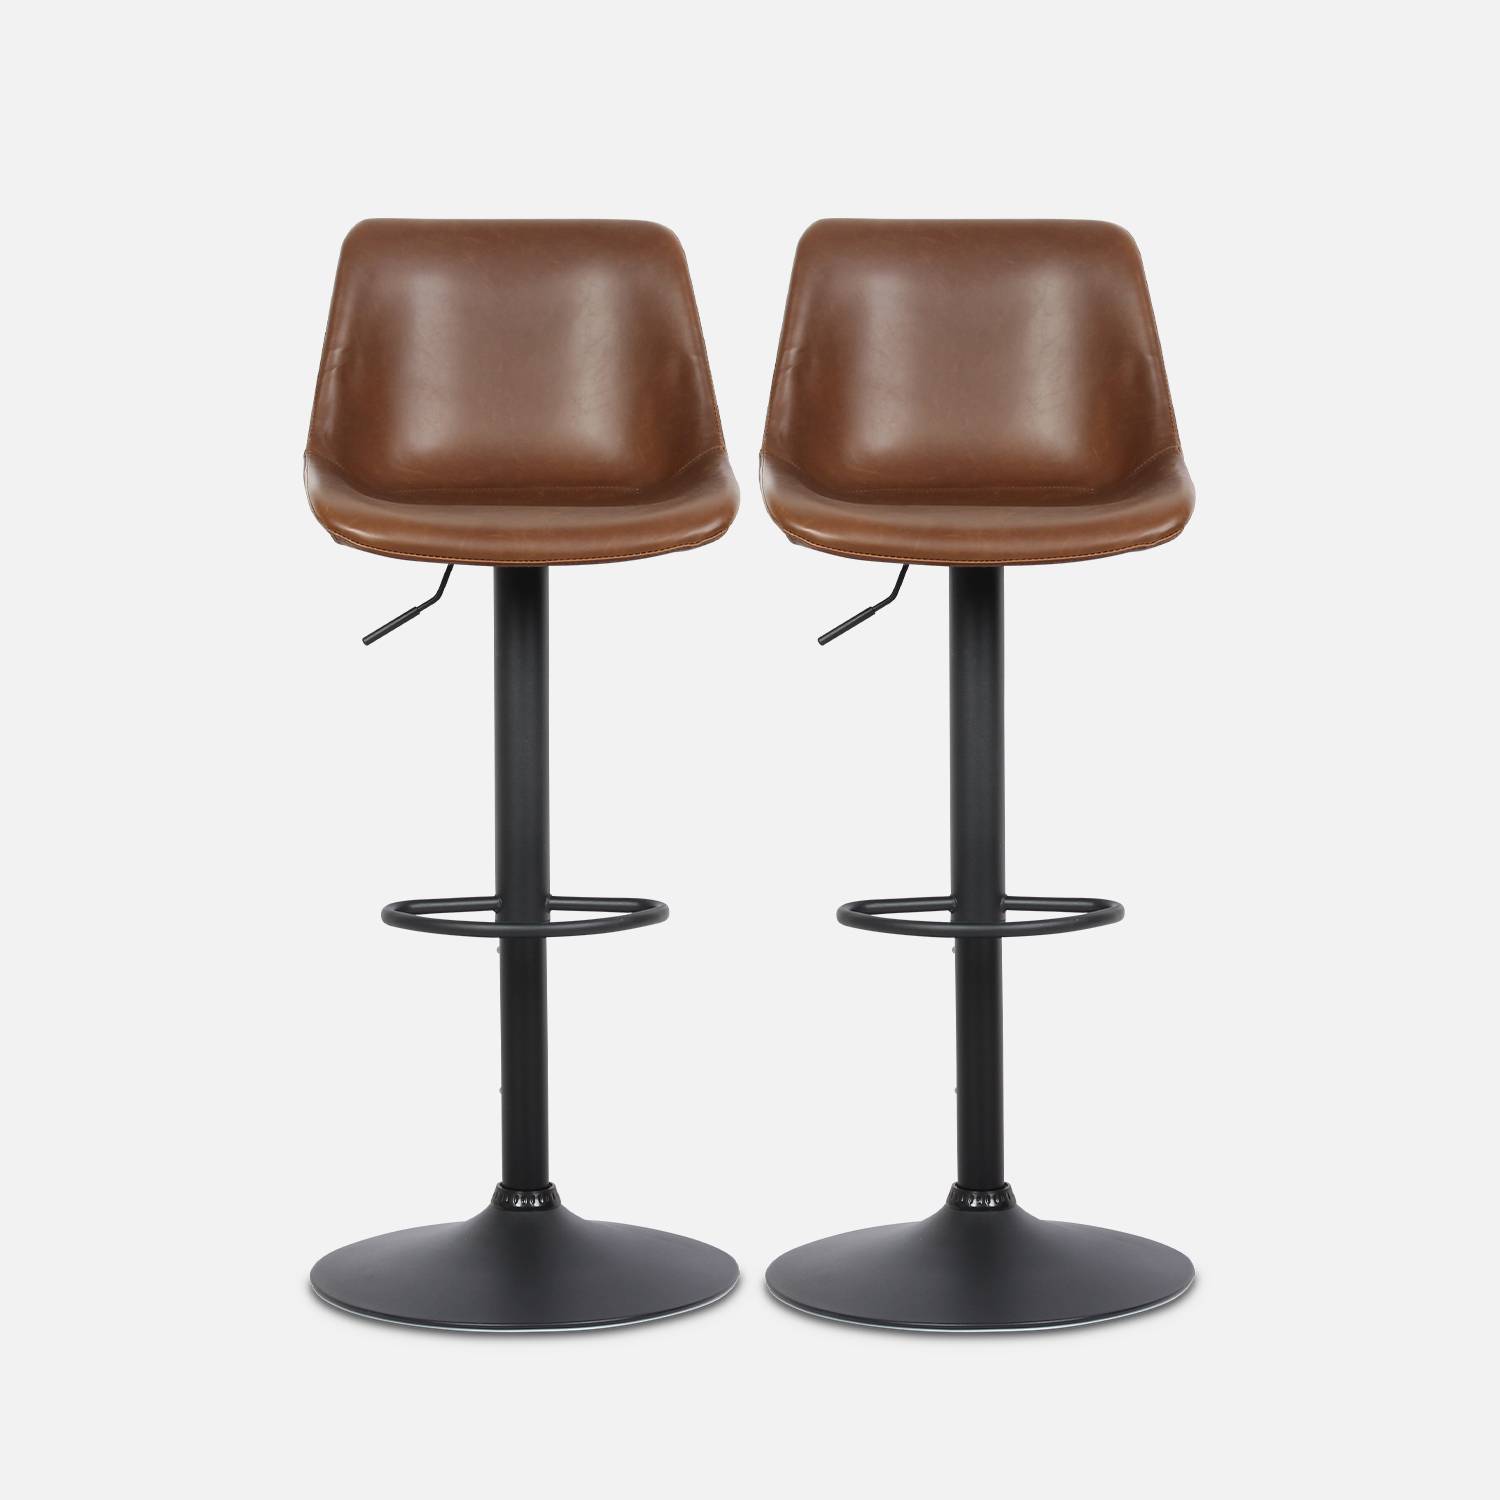 Pair of faux leather, square backrest, adjustable bar stools, seat height 61.5 - 83.5cm - Noah - Brown,sweeek,Photo4